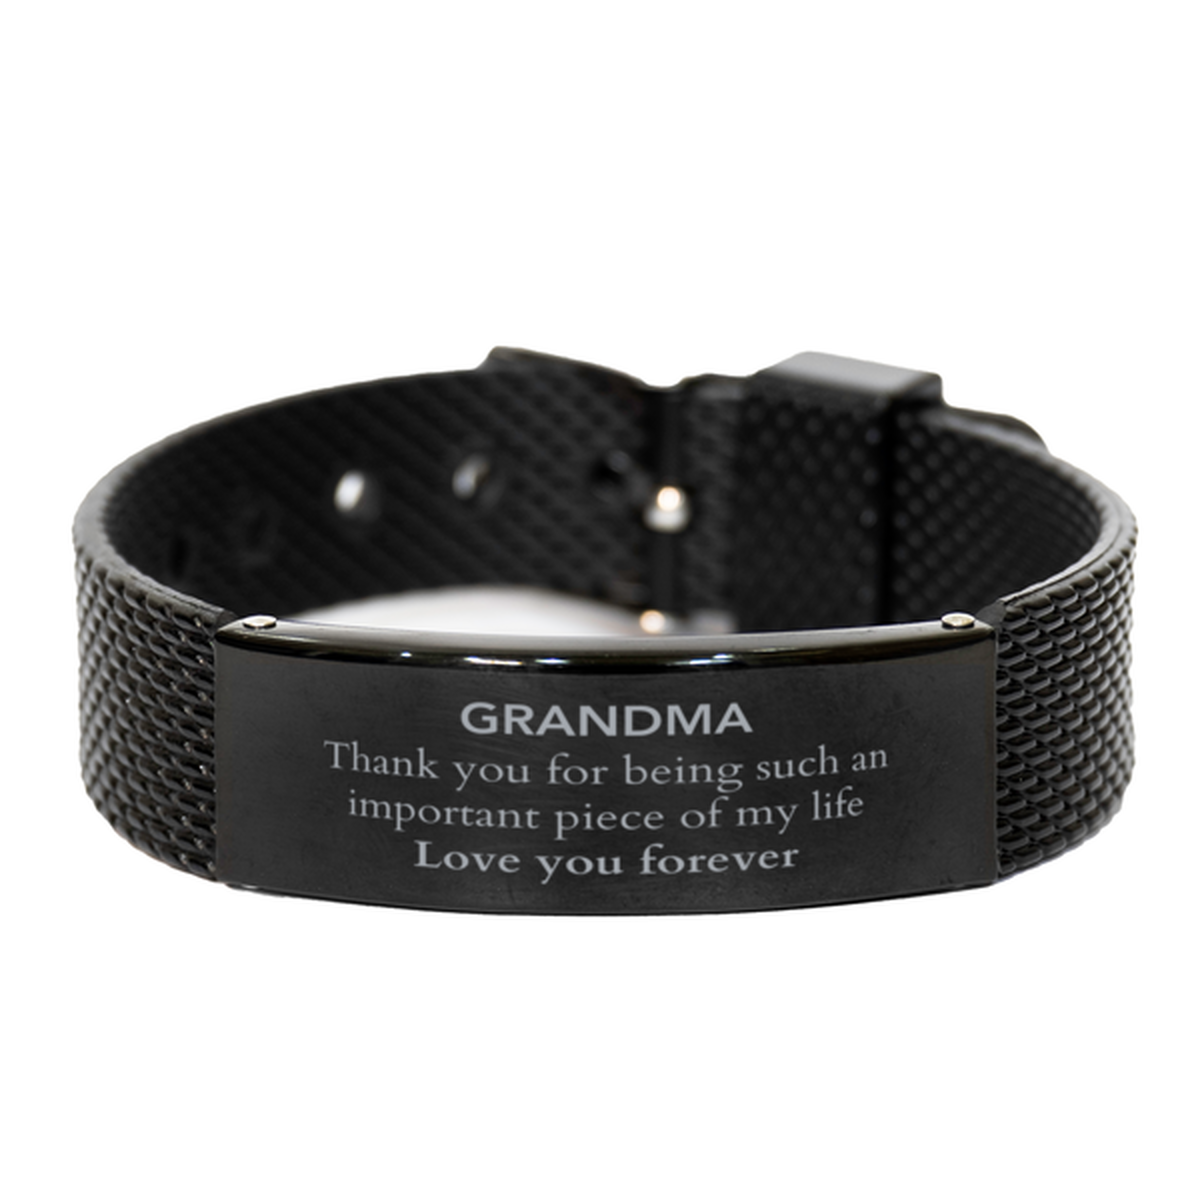 Appropriate Grandma Black Shark Mesh Bracelet Epic Birthday Gifts for Grandma Thank you for being such an important piece of my life Grandma Christmas Mothers Fathers Day